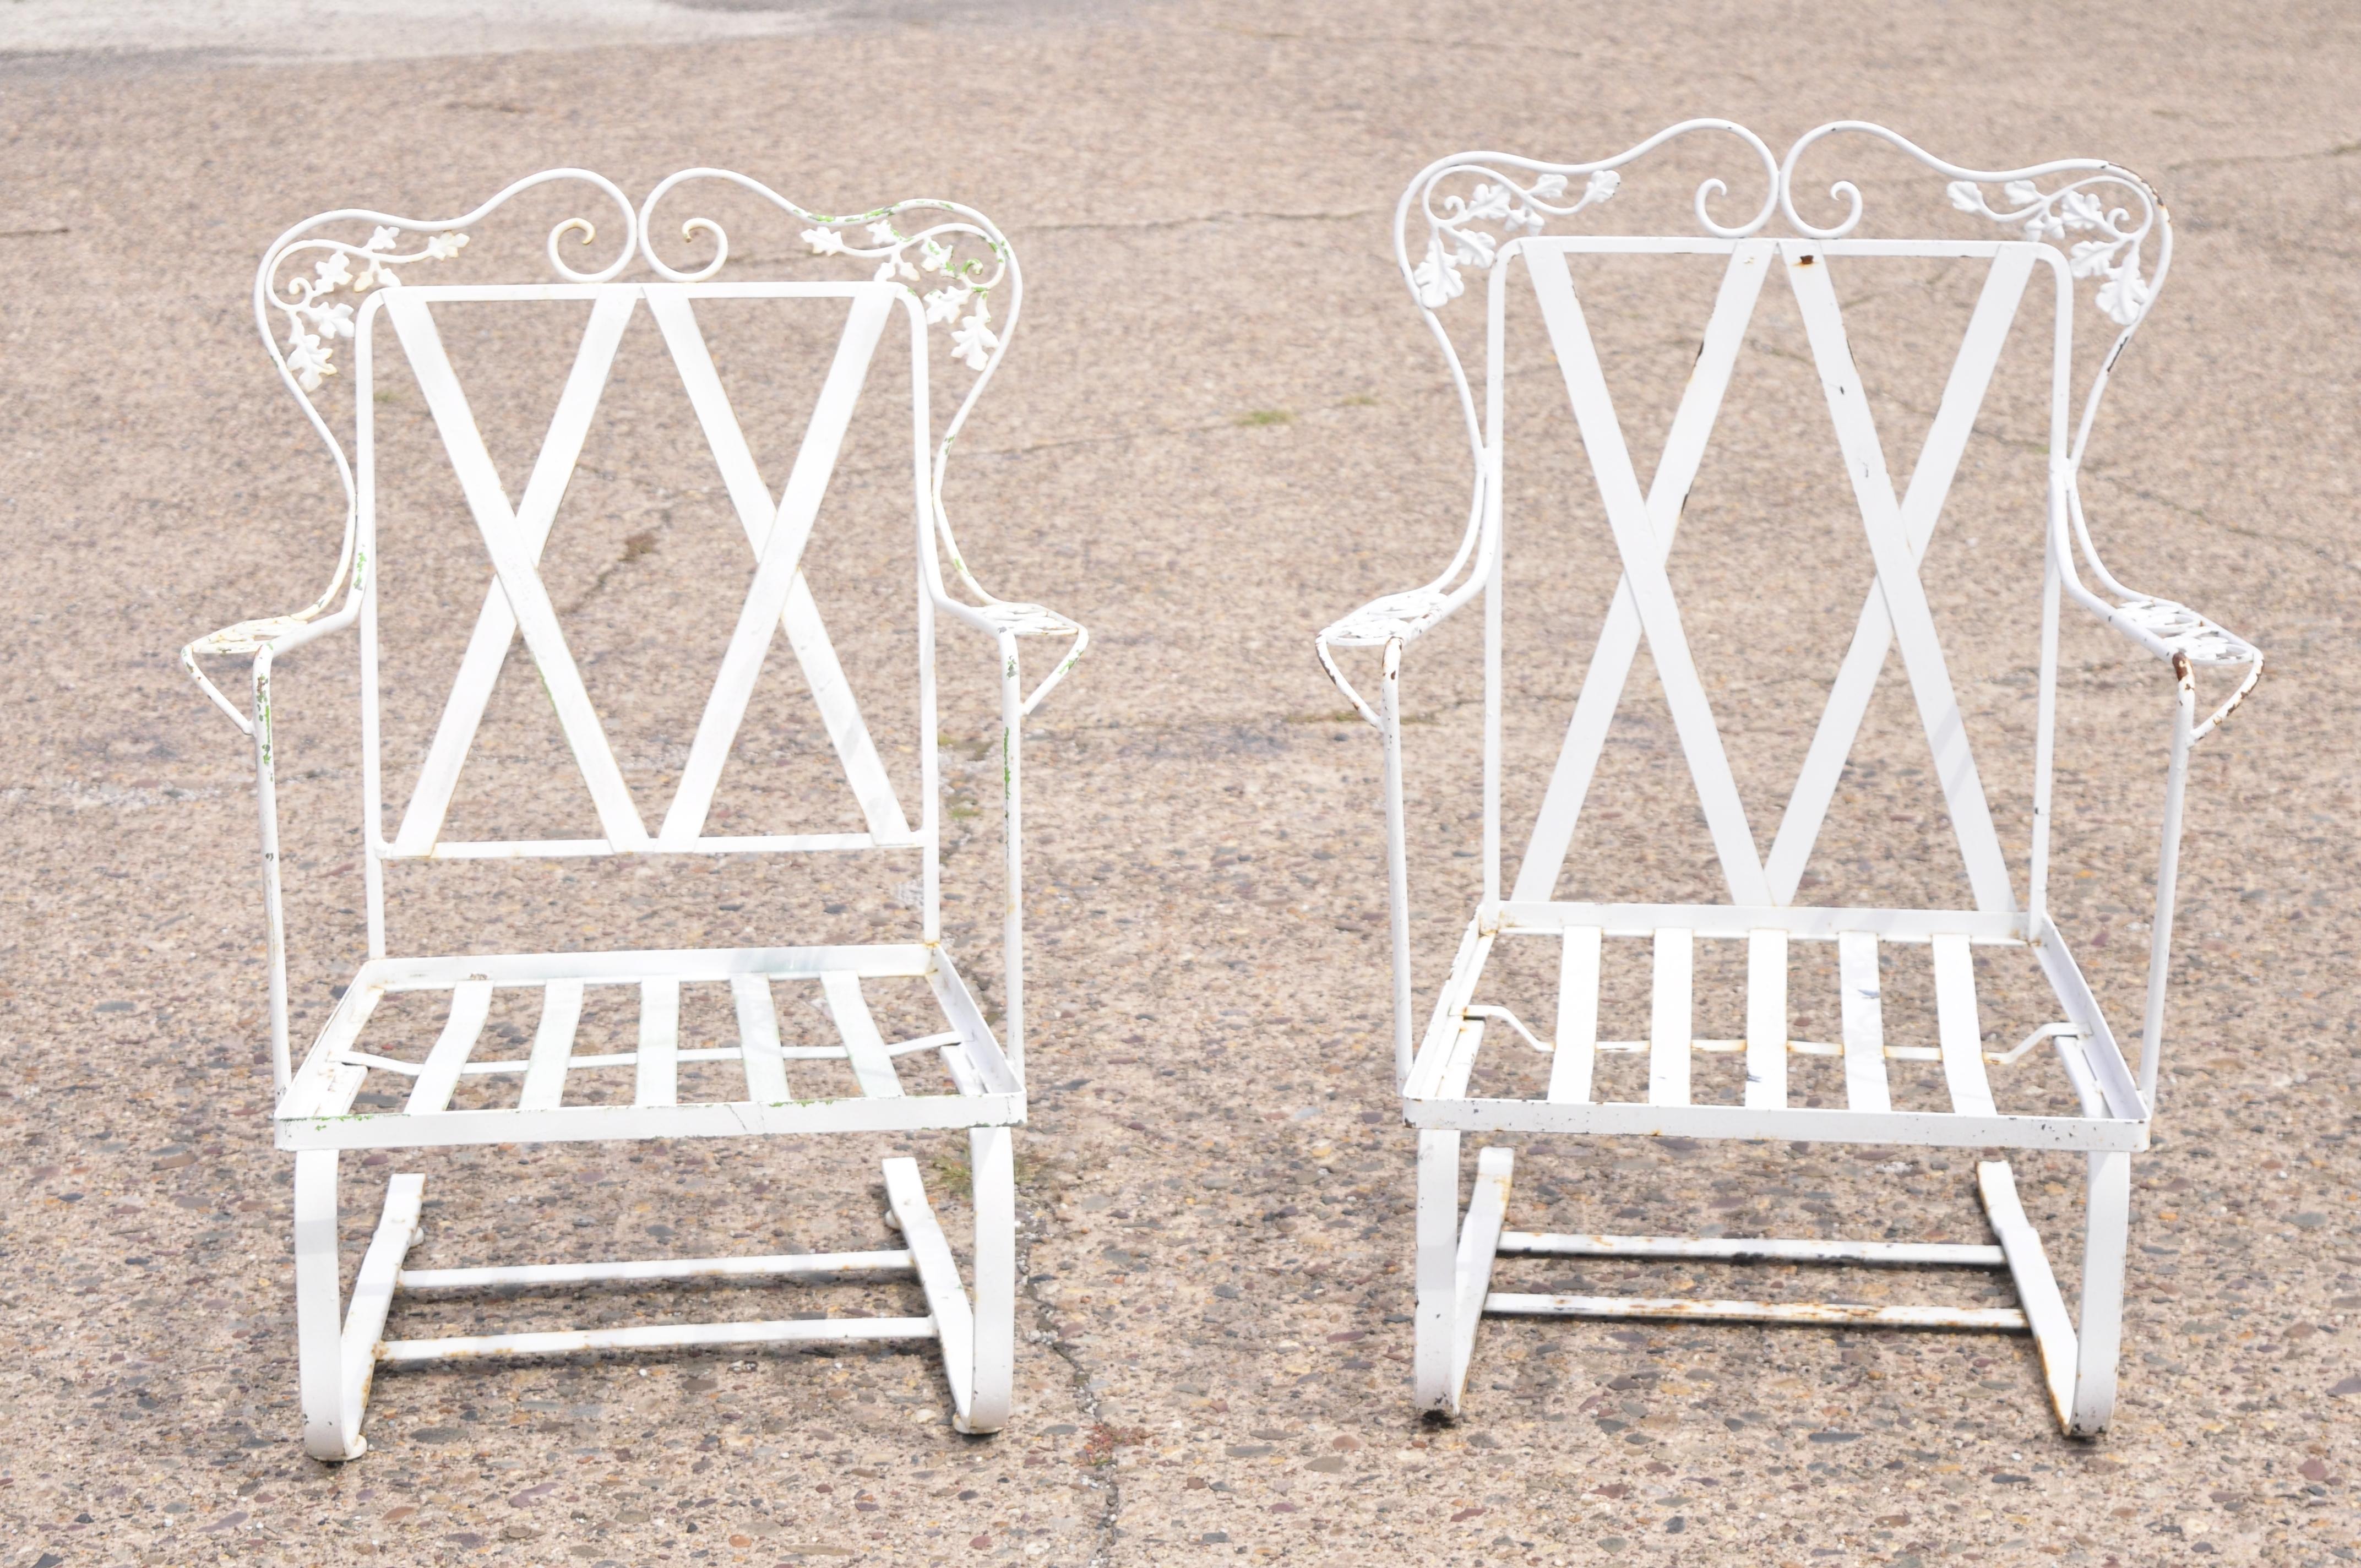 Antique Woodard Chantilly rose wrought iron garden patio bouncer lounge chair, a pair. Item features his and her frames (one chair slightly bigger), classic Chantilly rose pattern, wrought iron construction, original label, very nice vintage pair,